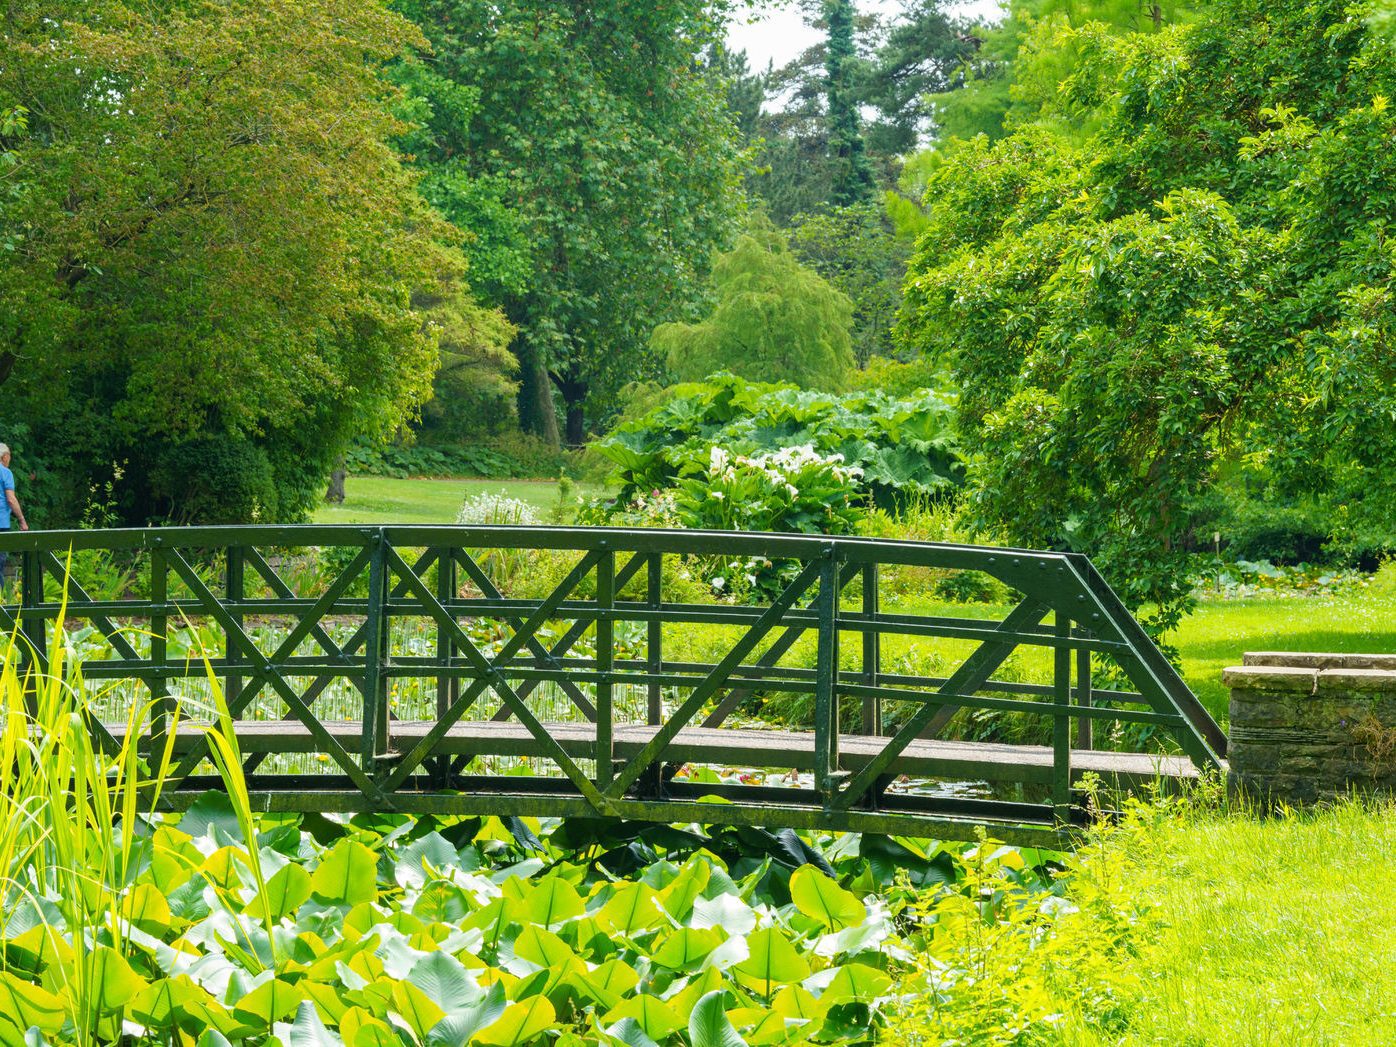 THE SMALL FOOTBRIDGE [ACROSS THE LILY POND AT THE BOTANIC GARDENS] 001